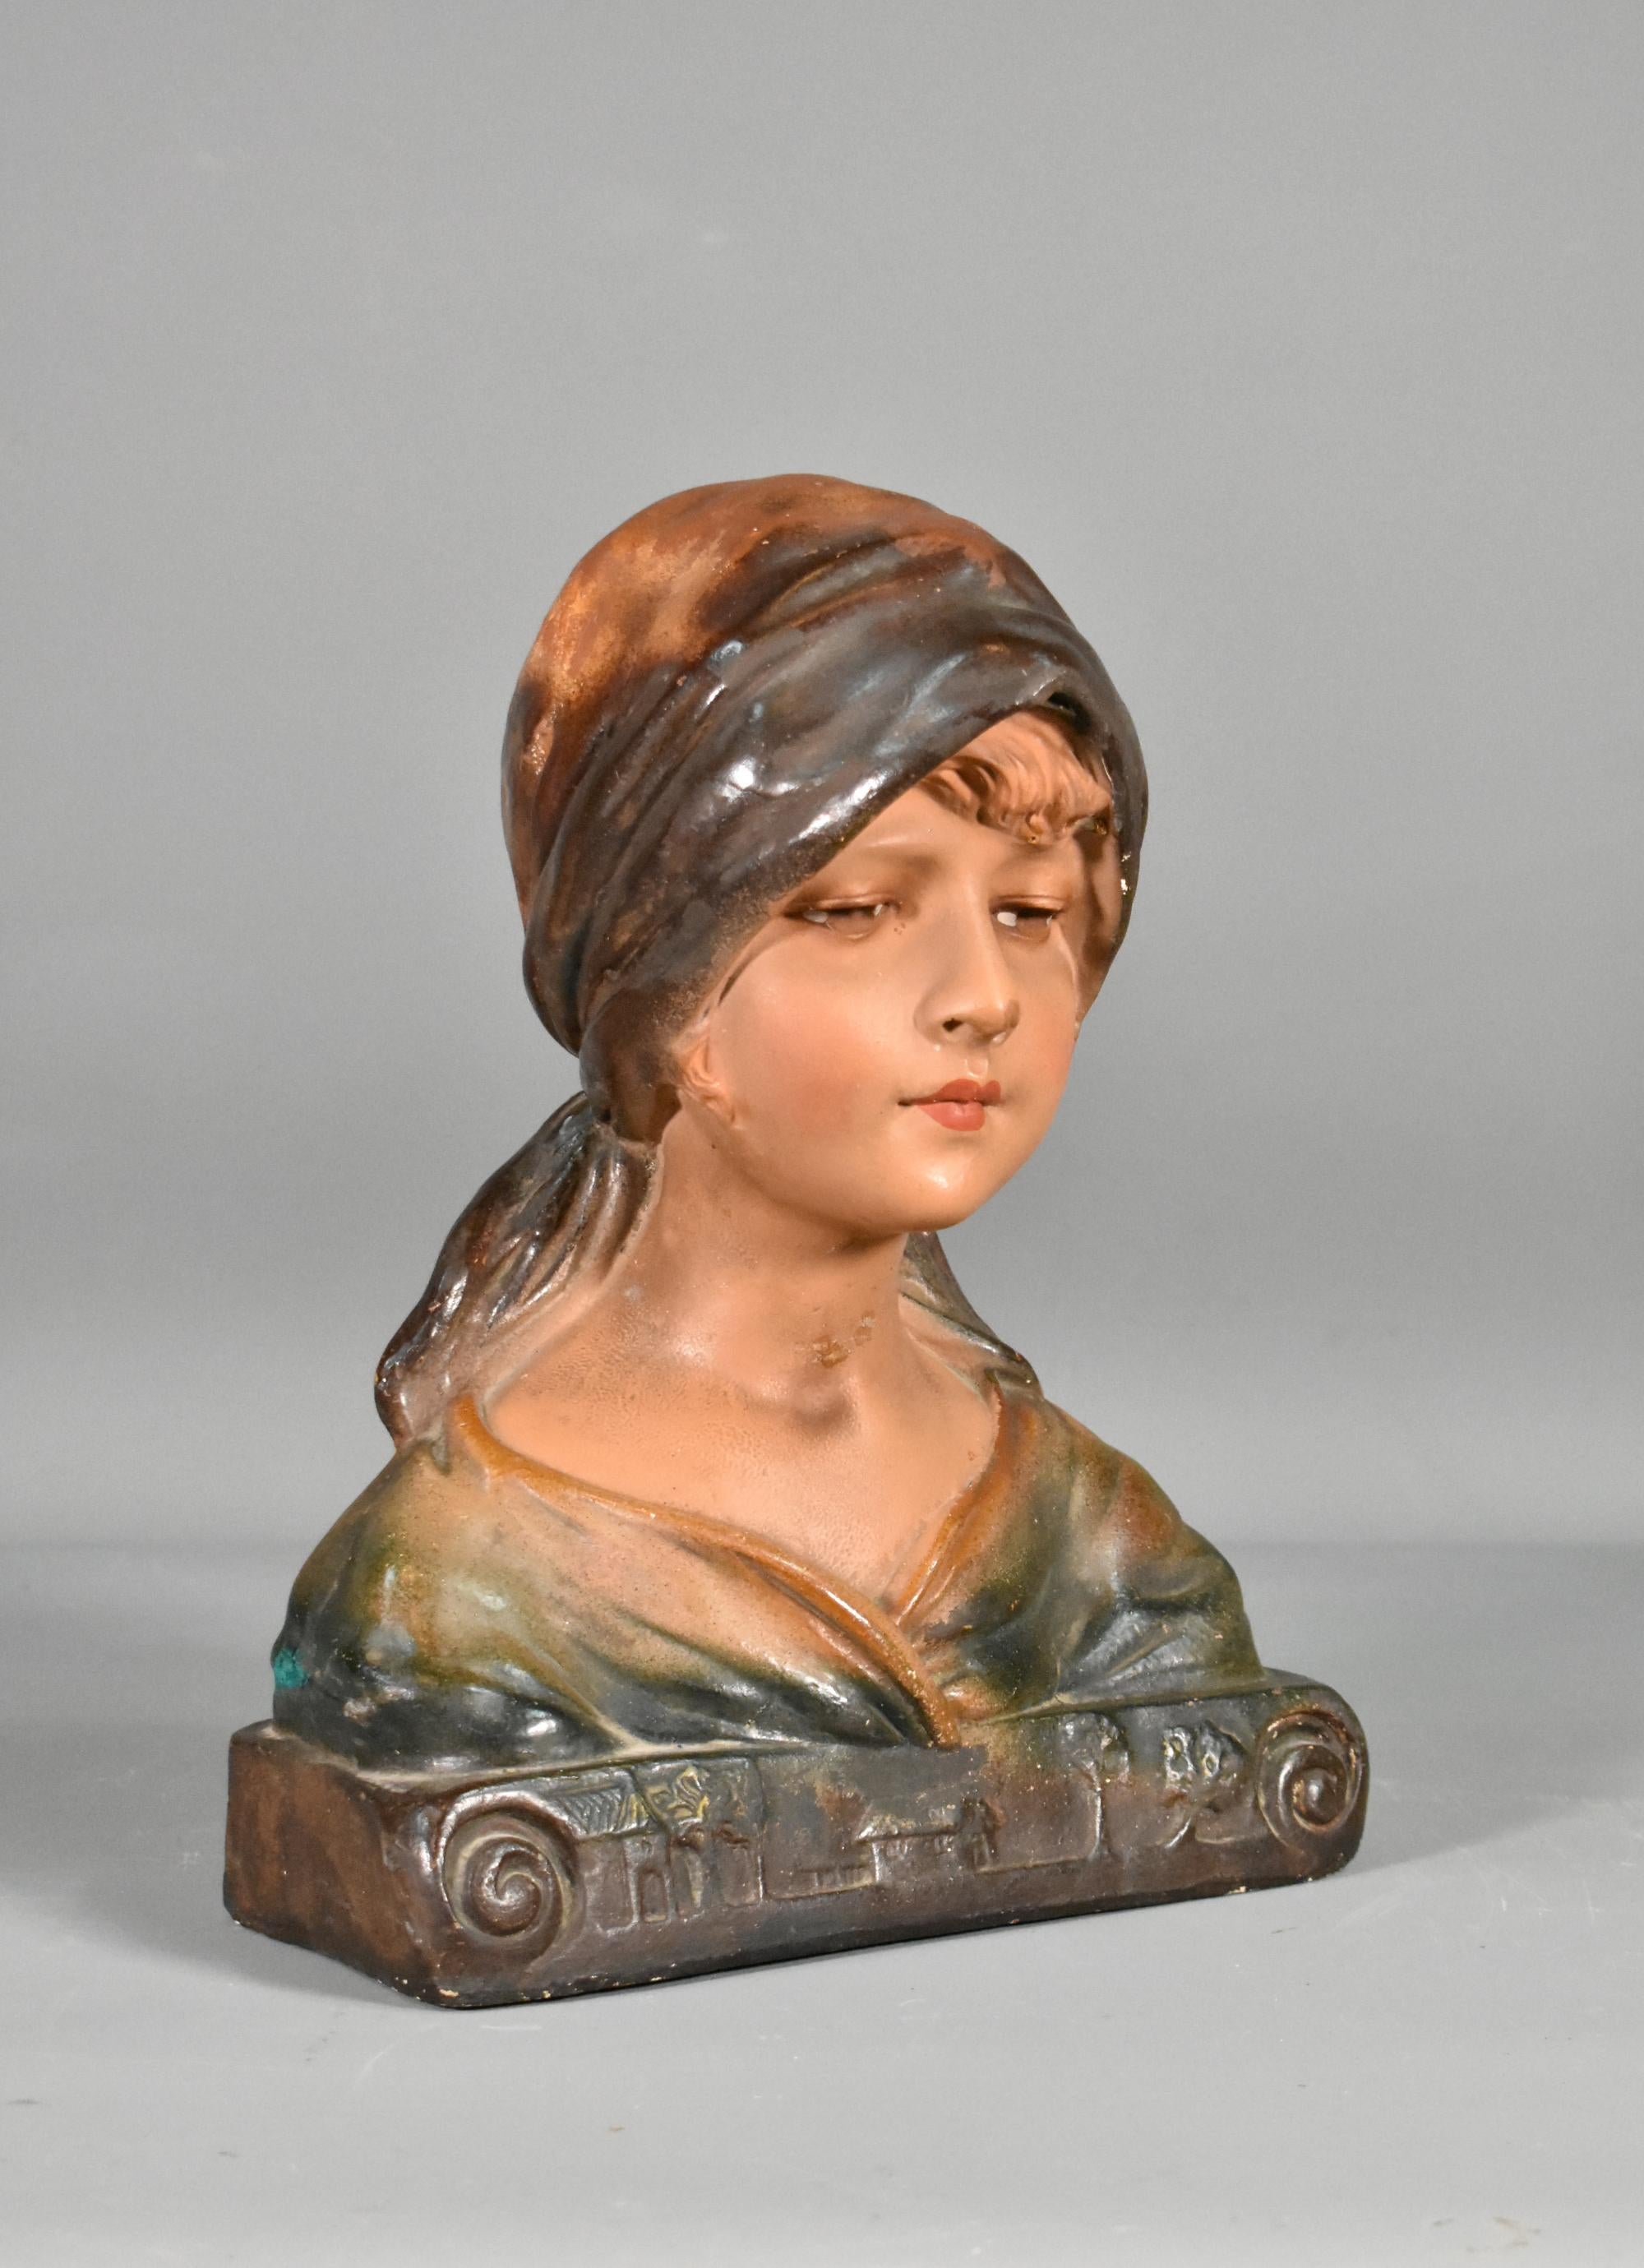 French Antique Bust of a Young Girl in Plaster 

A pretty polychrome plaster bust of a young girl wearing a headscarf with her eyes cast downwards. 

The piece features carvings of buildings and trees across the front base in the Art Nouveau style.